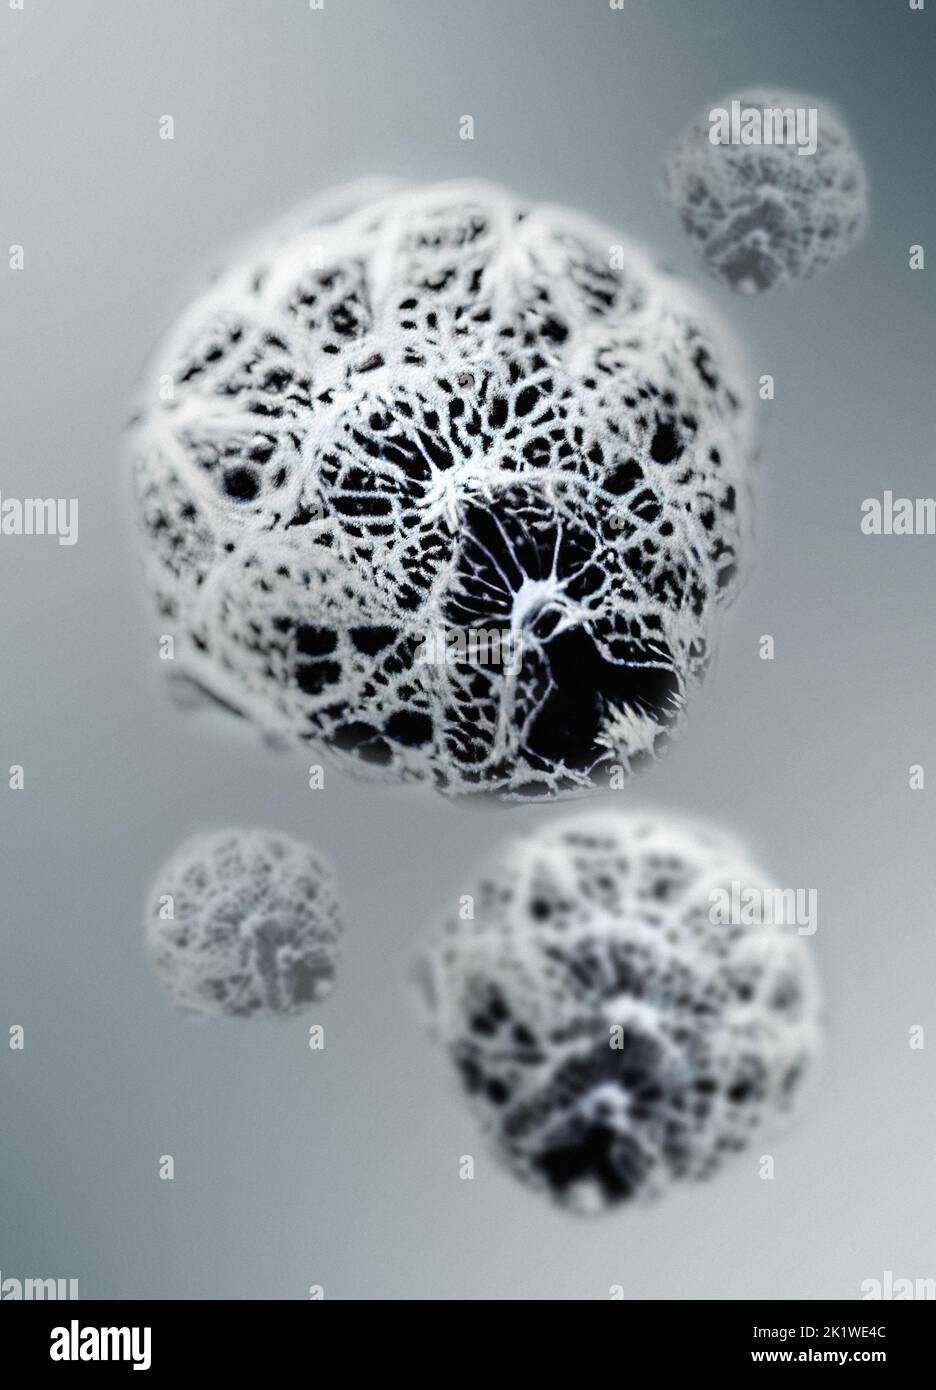 Alien microbe from space, conceptual illustration Stock Photo